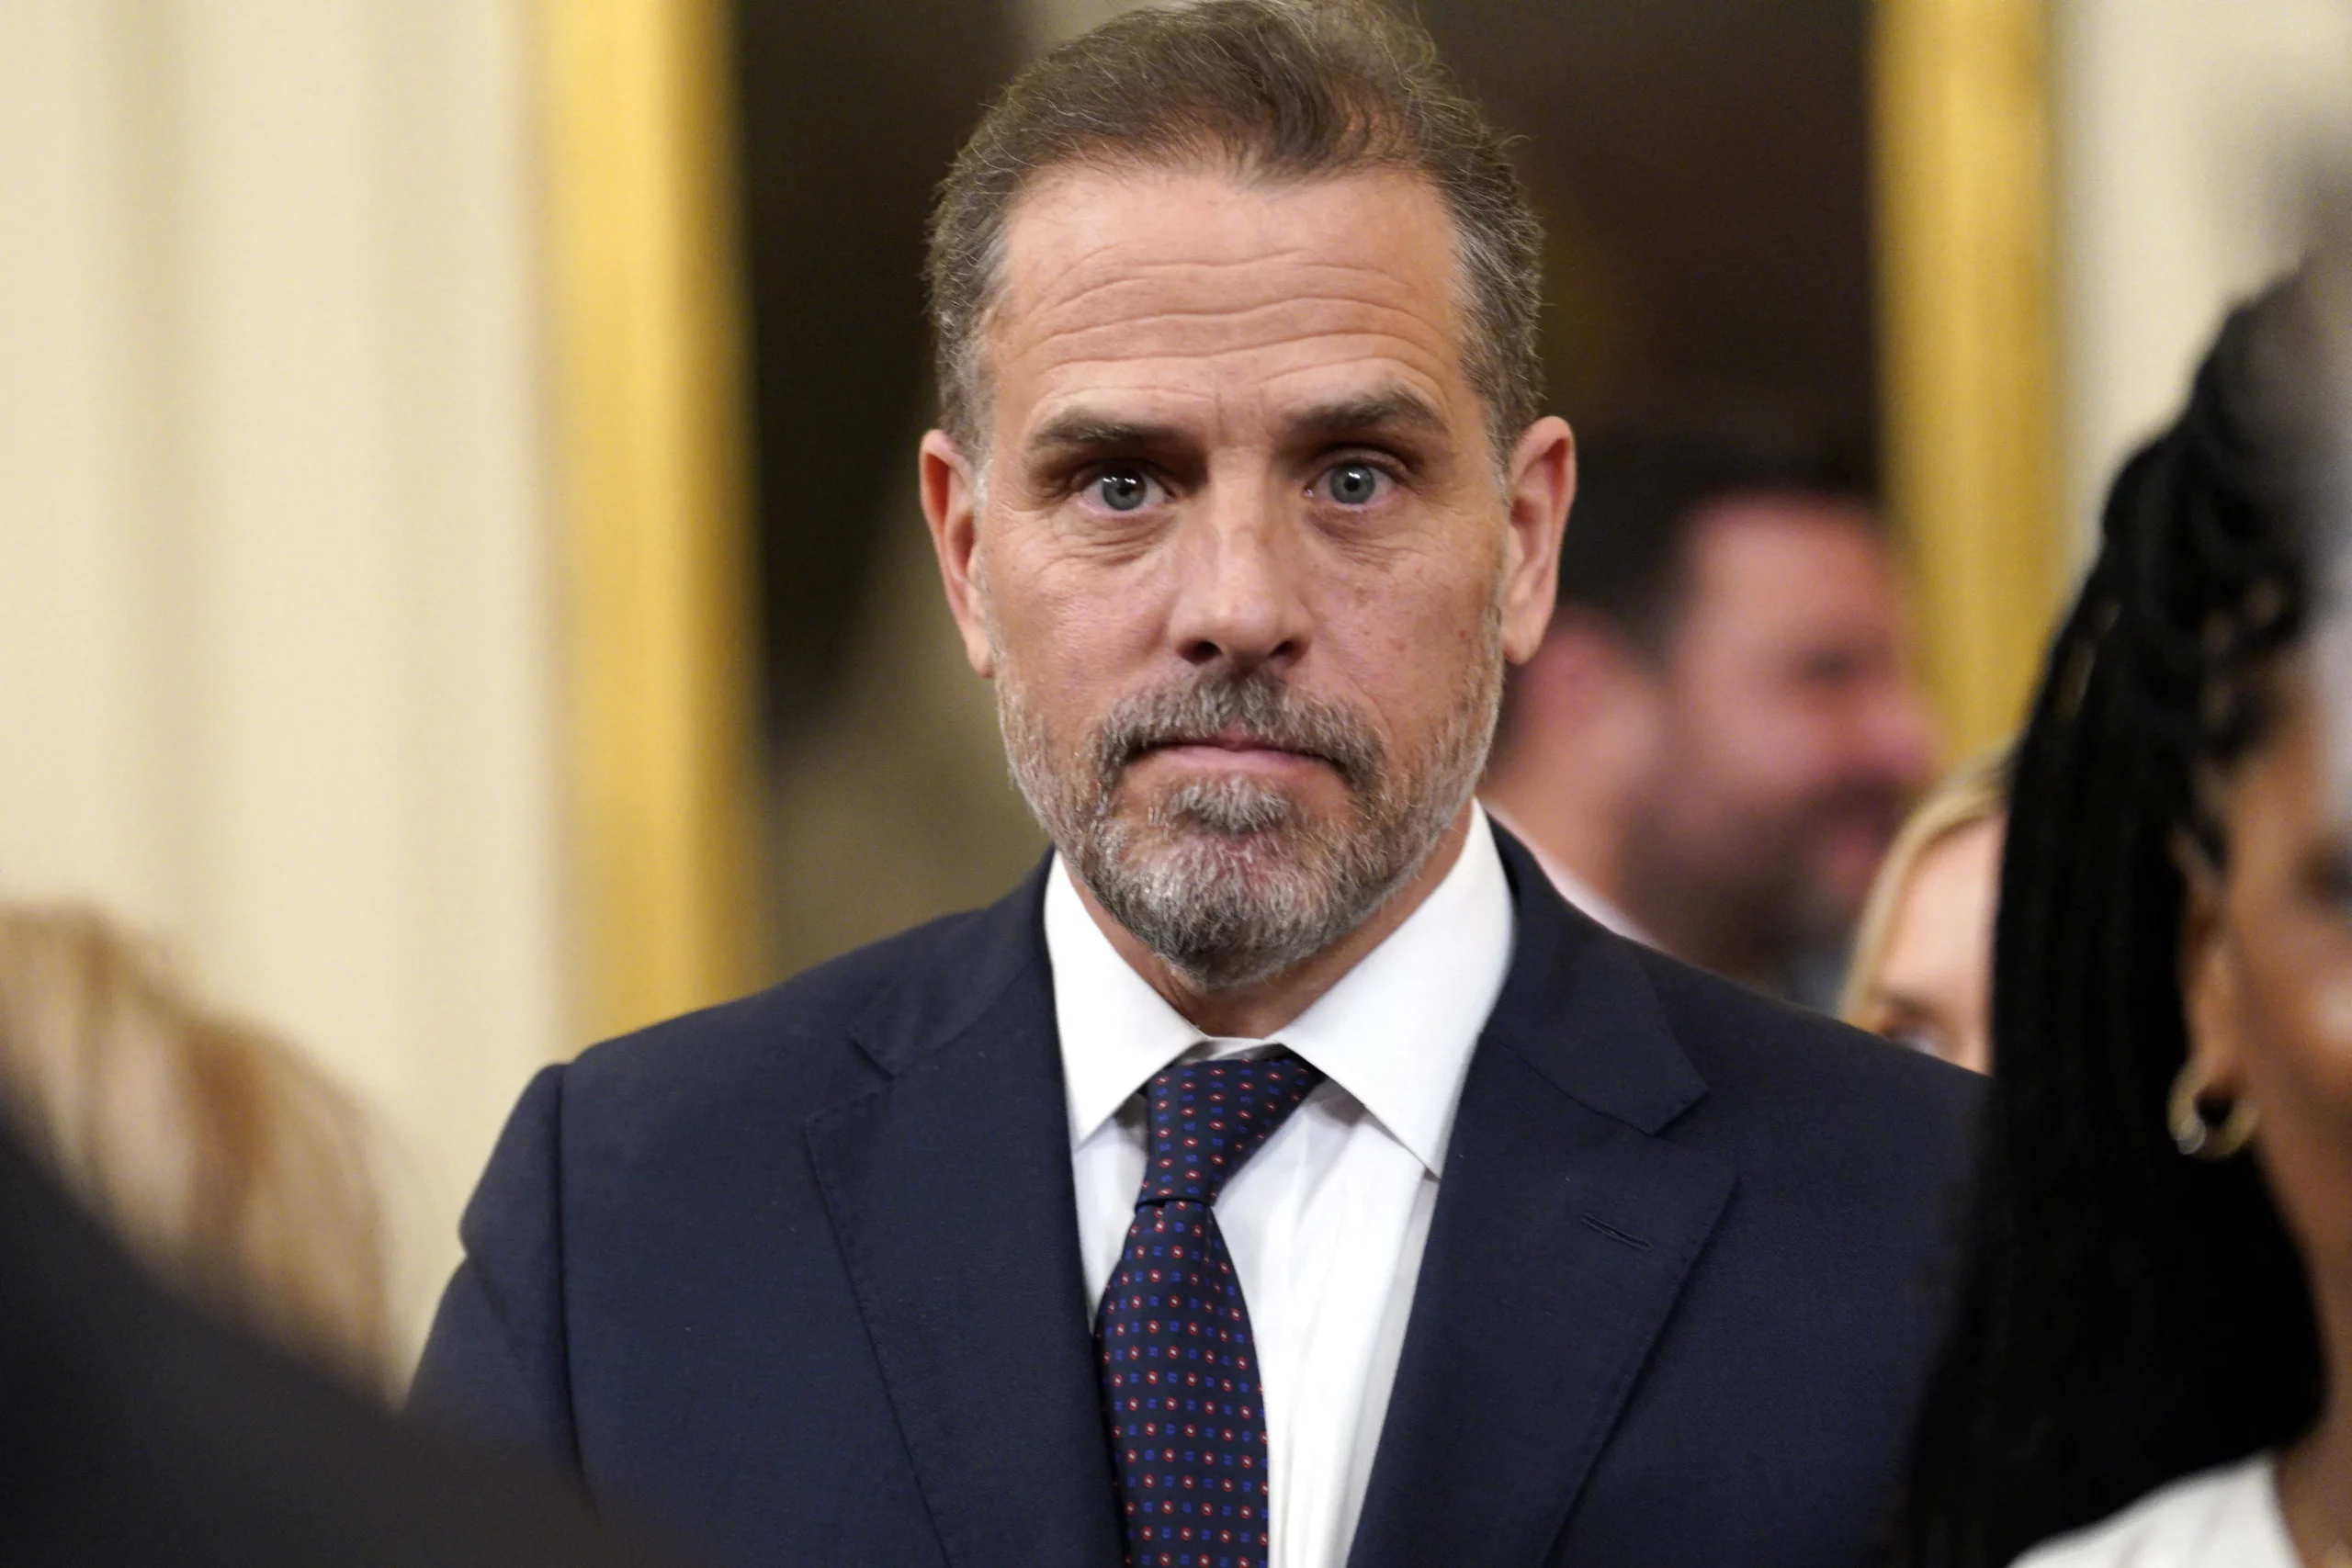 Hunter Biden: Plea deal for president’s son collapses in dramatic court hearing